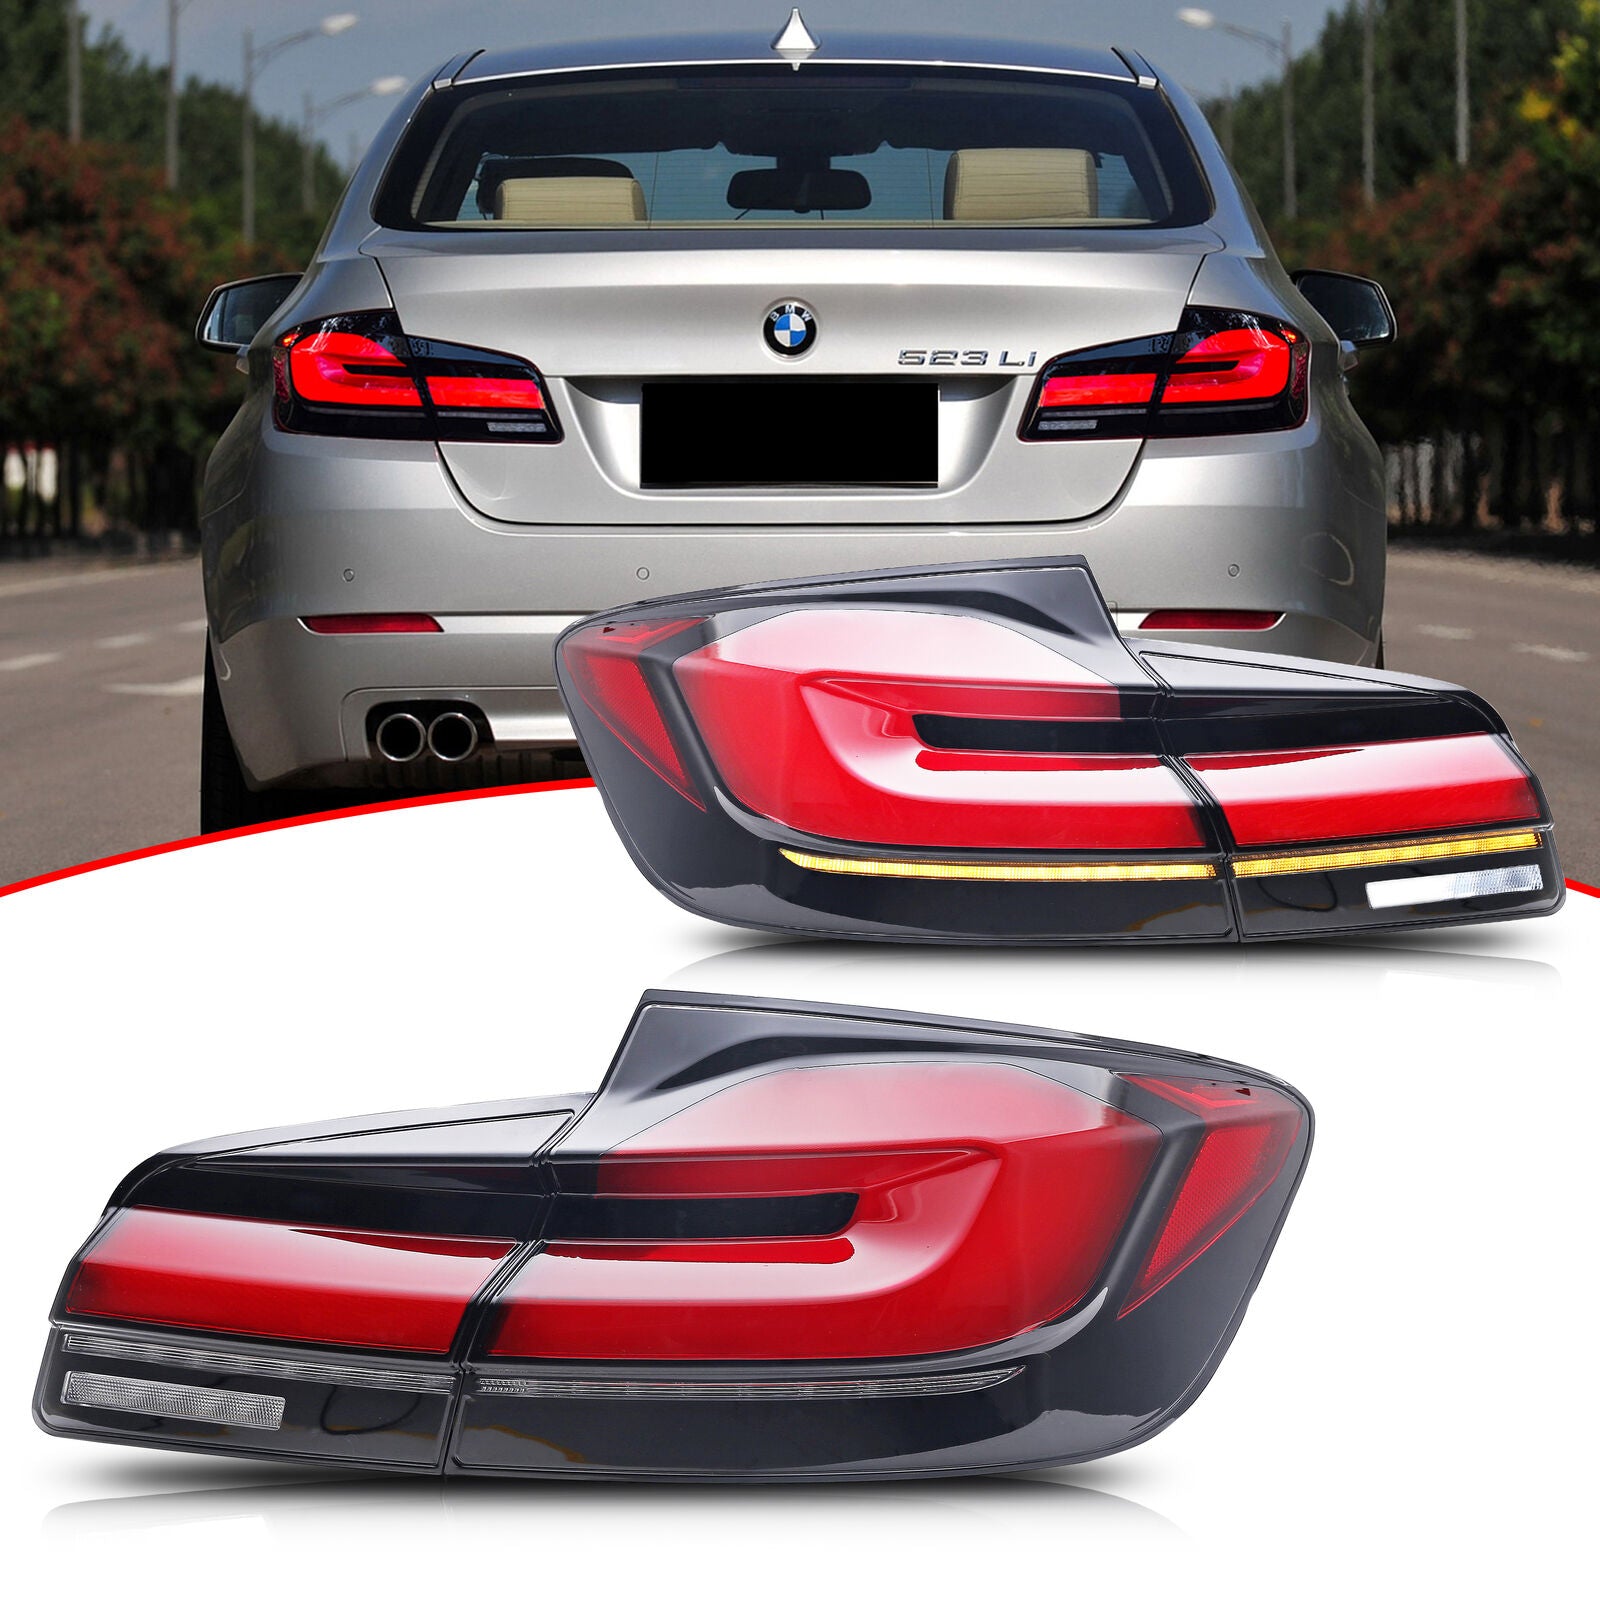 inginuity time LED G38 Tail Lights for BMW 5 Series F10 F18 M5